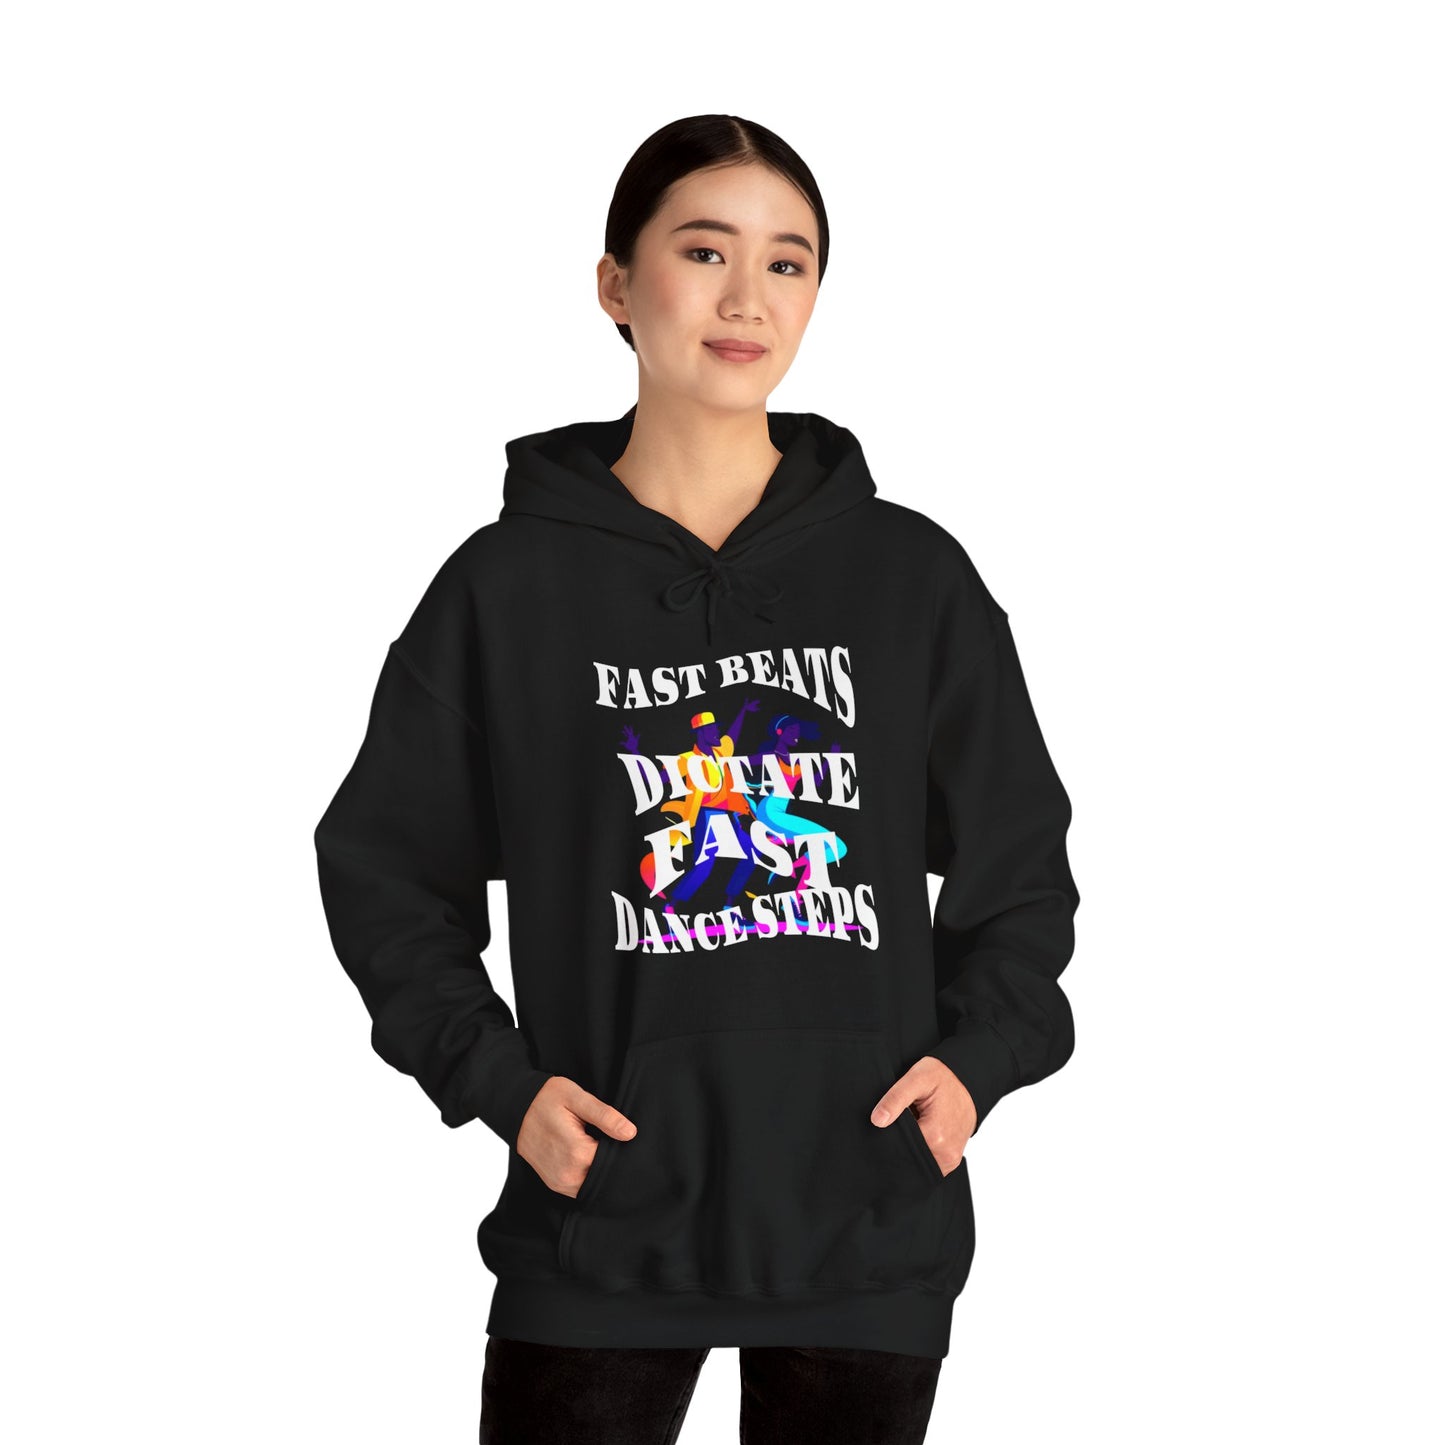 Unisex Heavy Blend™ Hooded Sweatshirt, Fast Beats Dictates Fast Dance Steps (white Fonts)